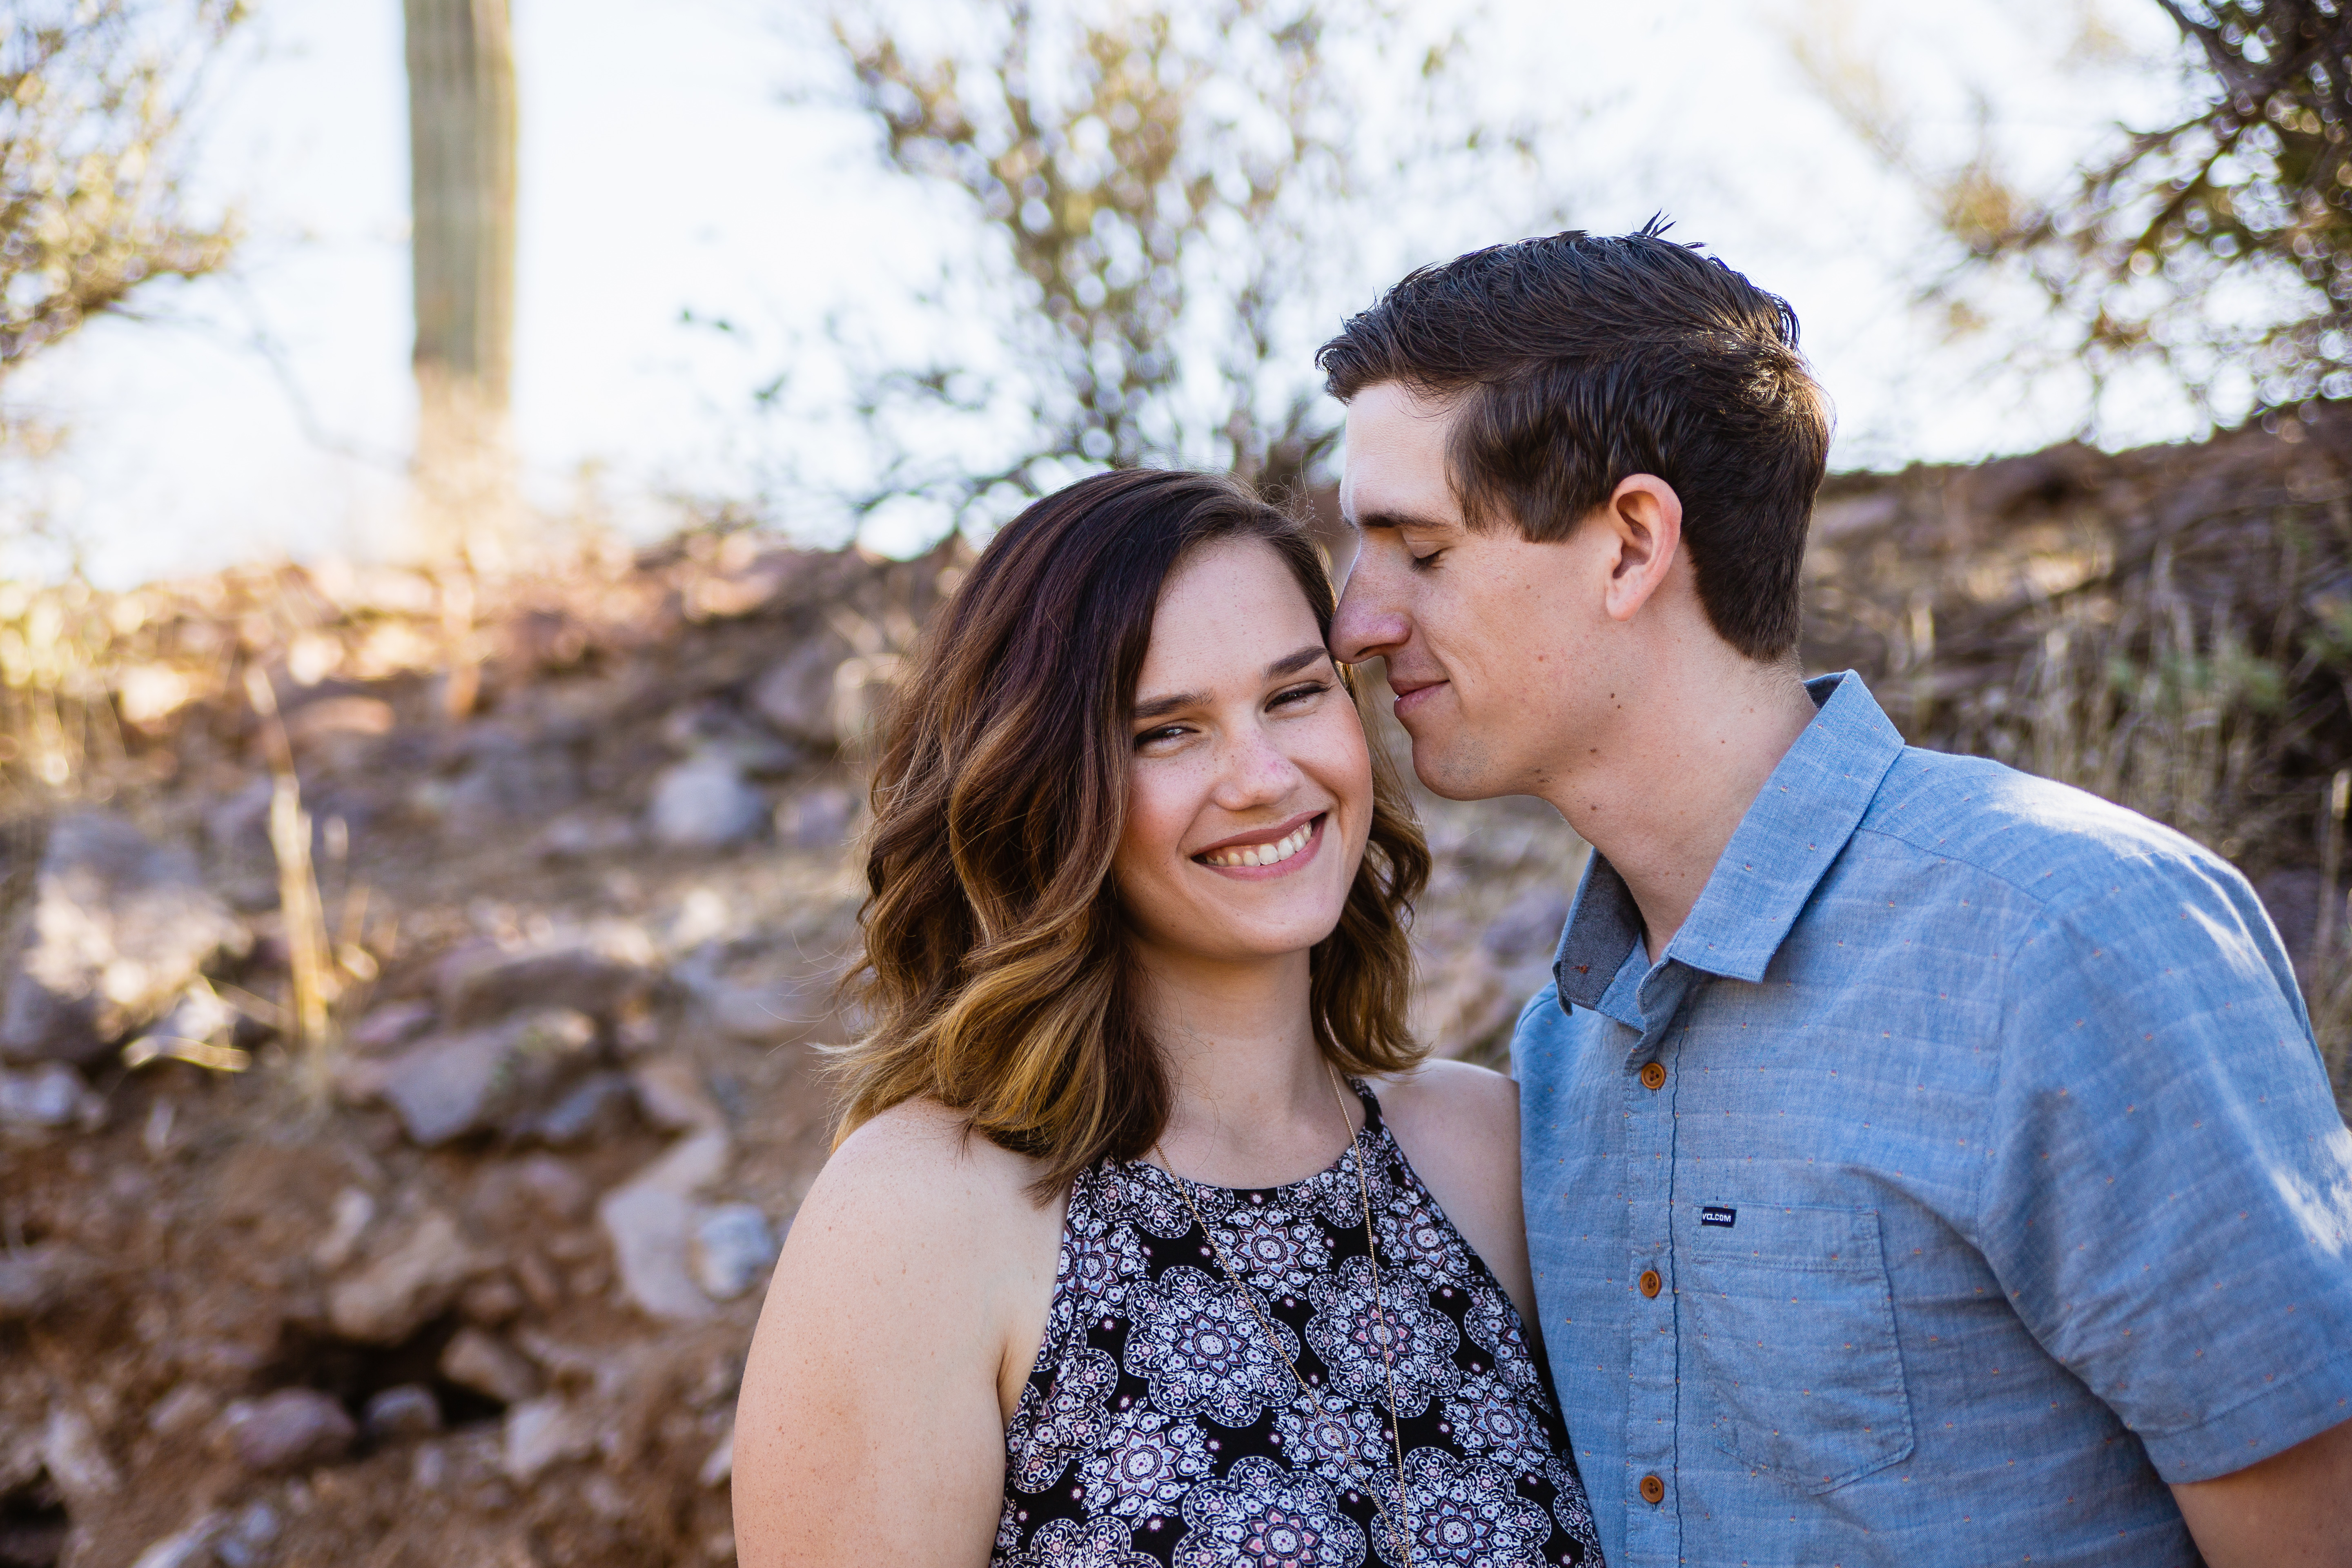 Fiance snuggling temple during desert engagement session at Lost Dutchman State Park by Phoenix wedding photographers PMA Photography.